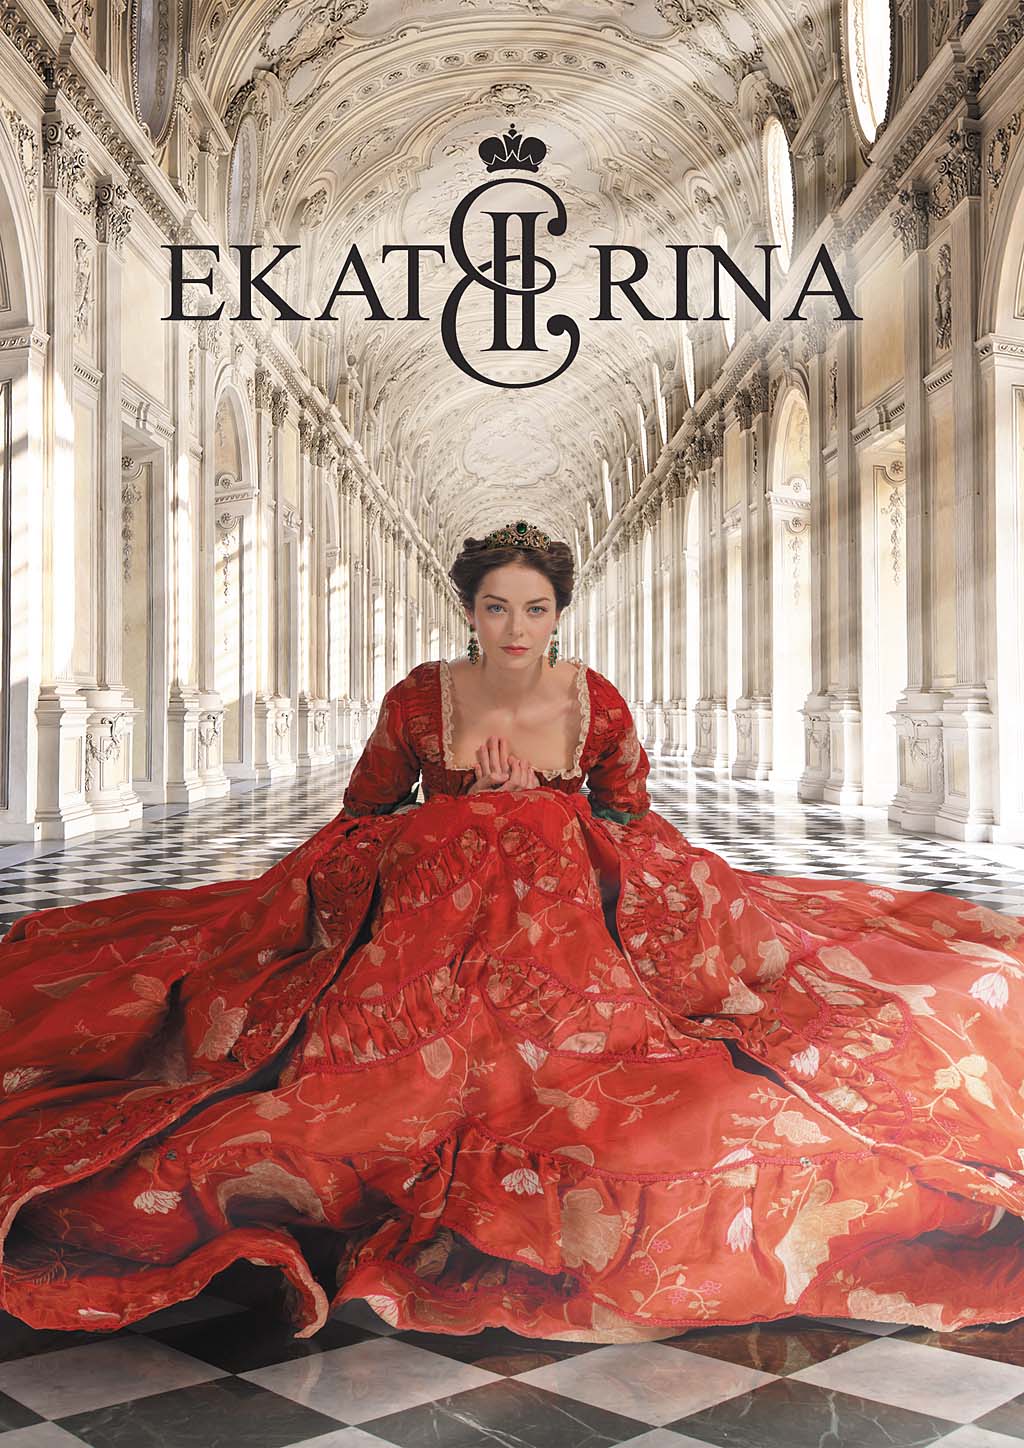 EKATERINA CONTINUES TO WIN OVER TV AUDIENCES  AROUND THE WORLD